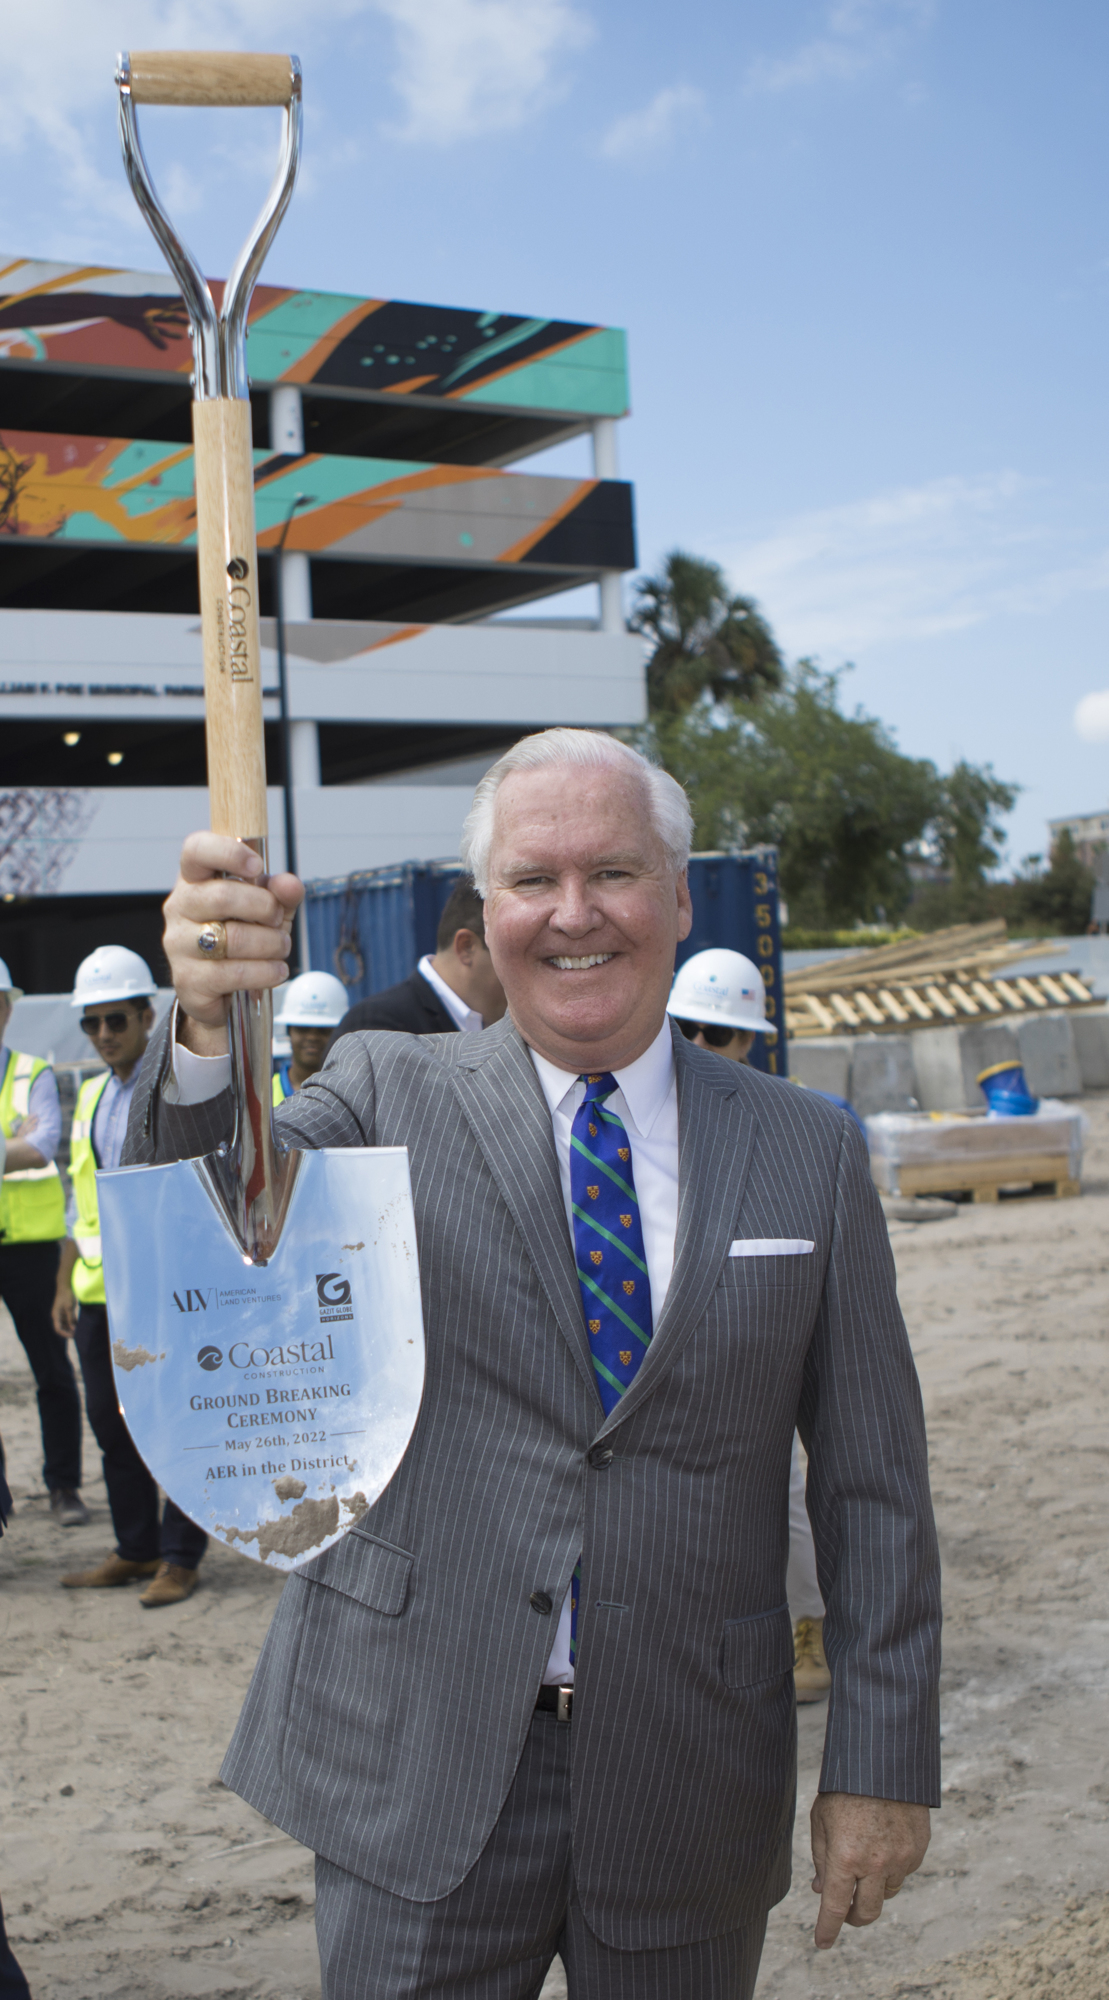 Former Tampa Mayor Bob Buckhorn takes a victory lap at the ceremonial ground break of the Arts and Entertainment Residences, a 334-unit luxury tower being built at 300 W. Tyler Ave in Tampa.  (Mark Wemple)